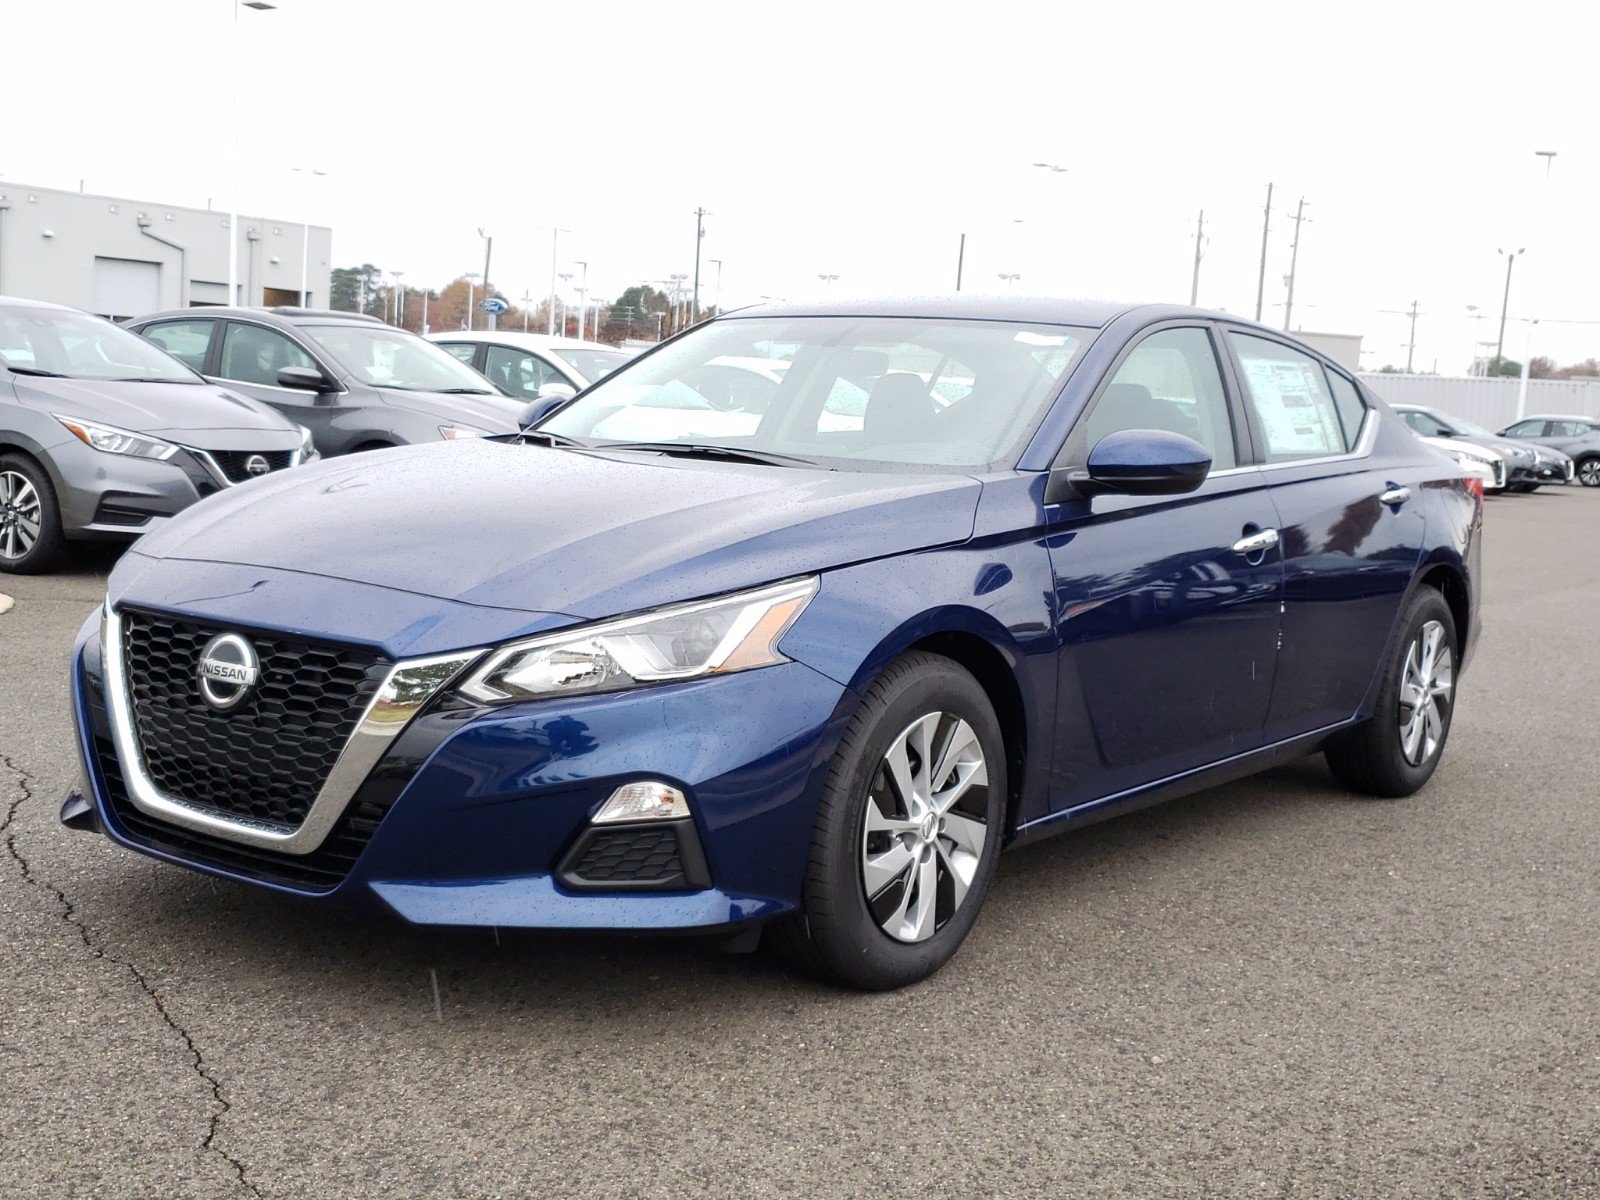 New 2020 Nissan Altima 2 5 S FWD 4dr Car